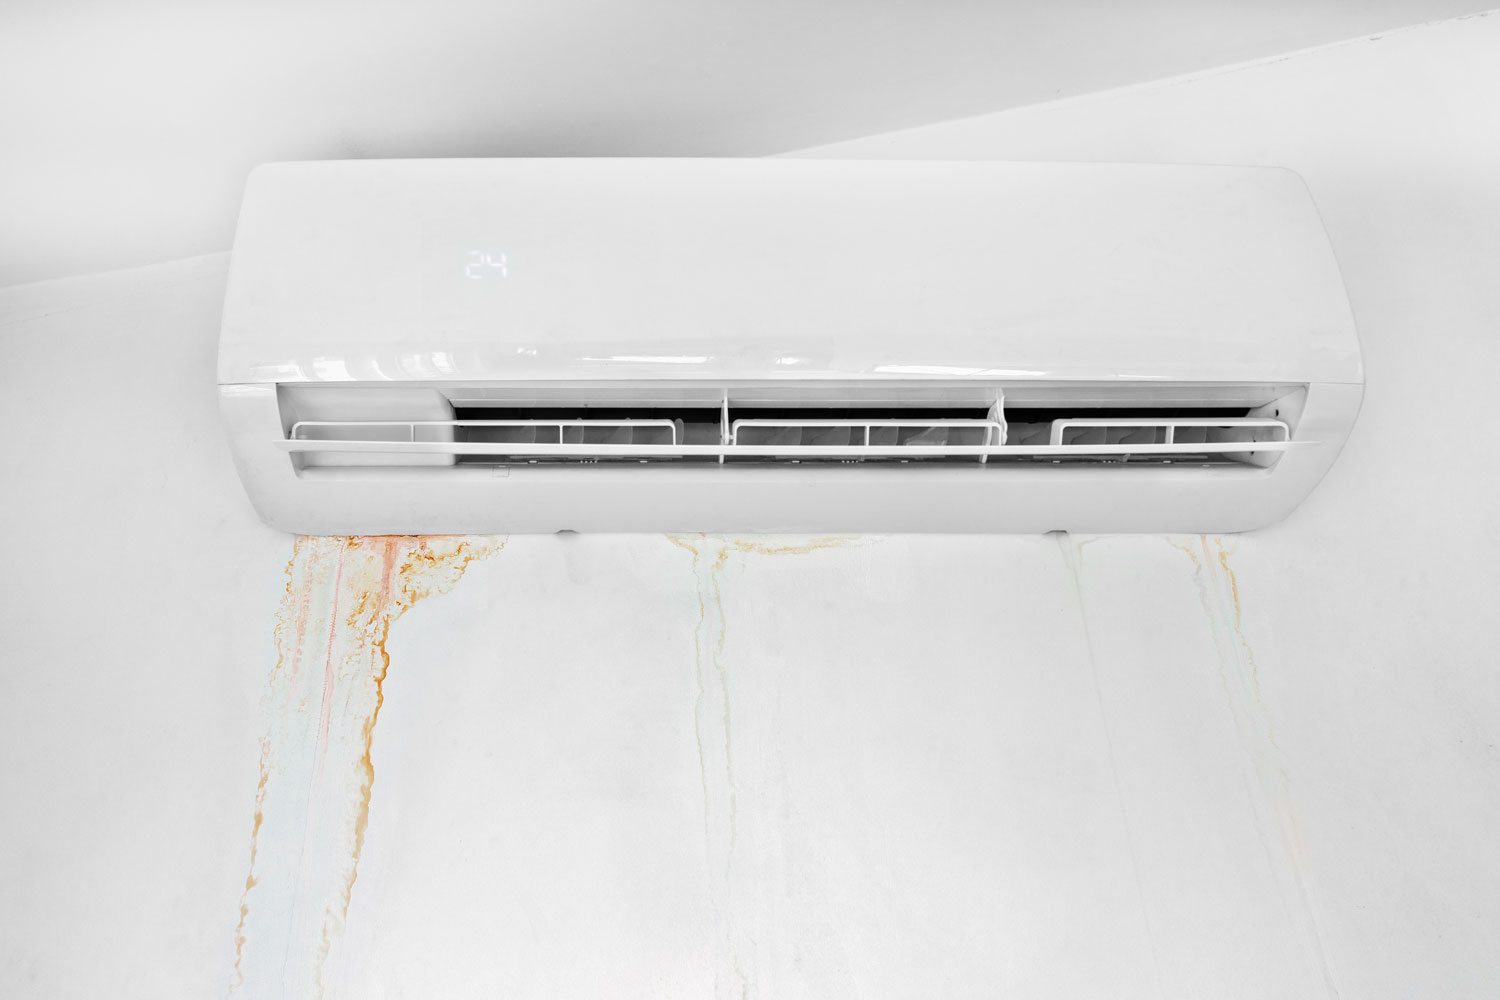 Water Damage and Mold Caused by Air Conditioner